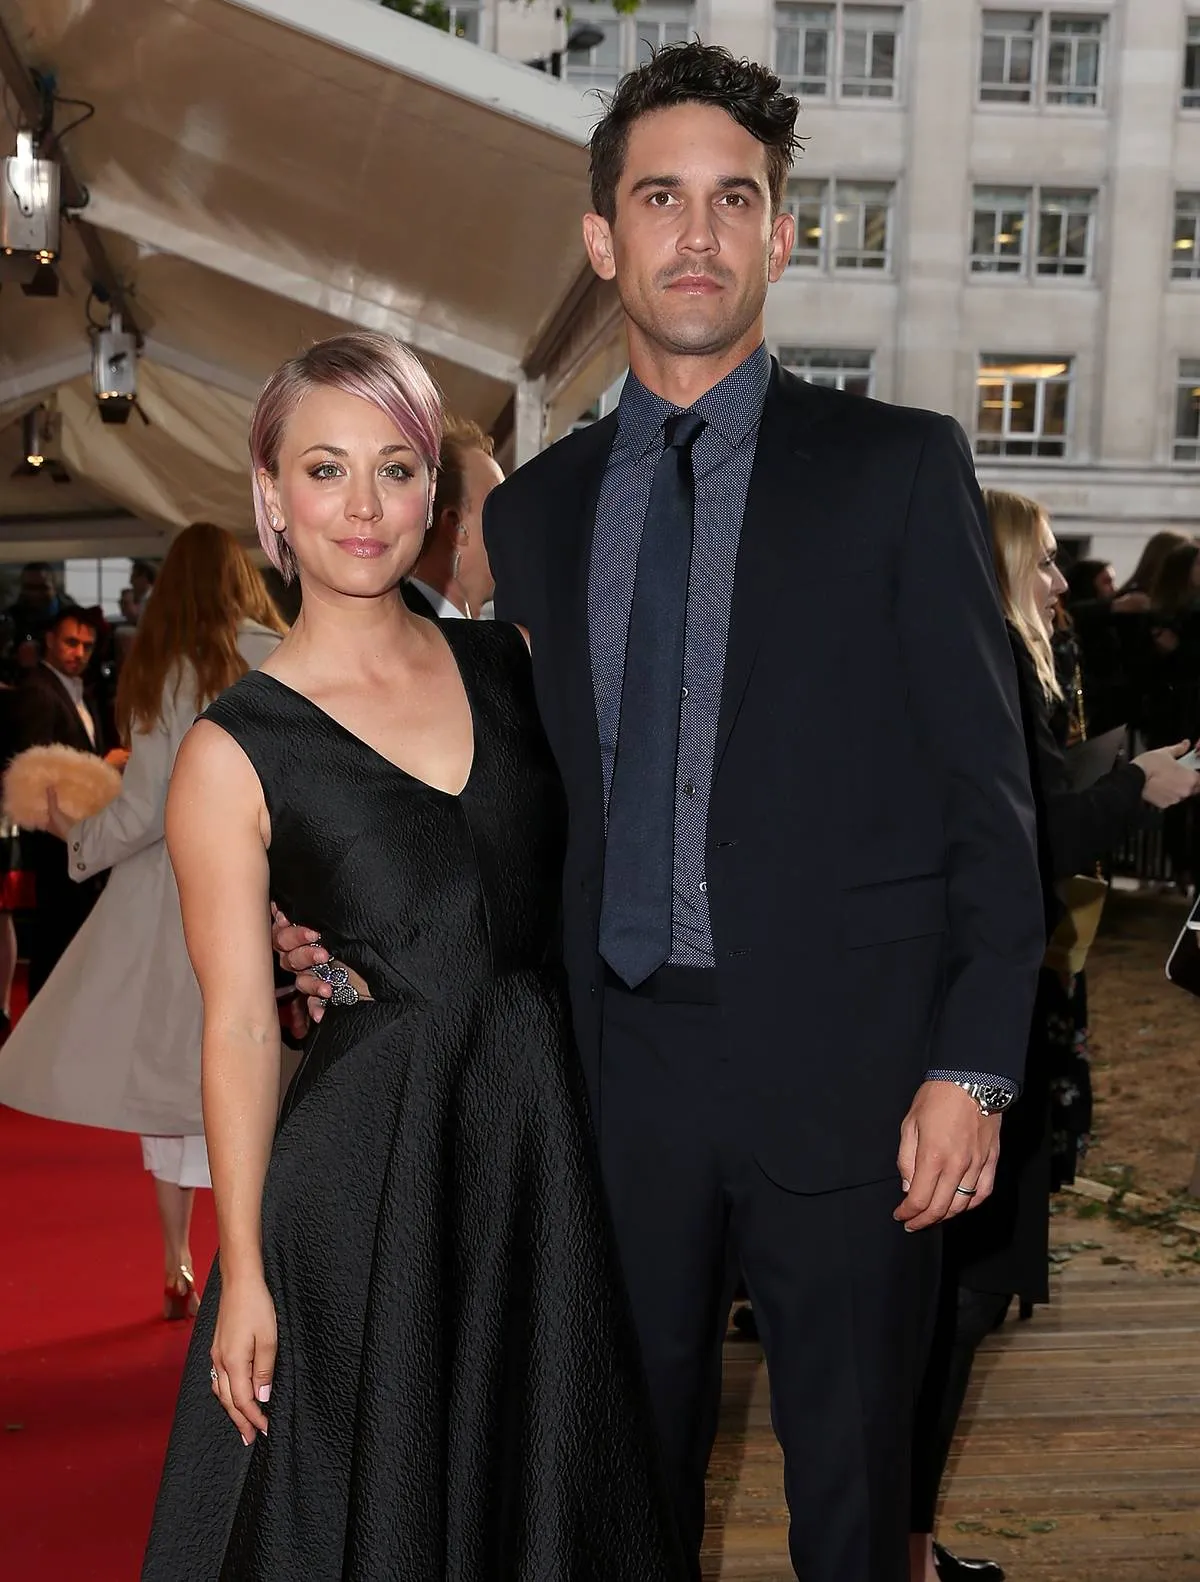 Kaley Cuoco And Ryan Sweeting Were Married For A Few Years